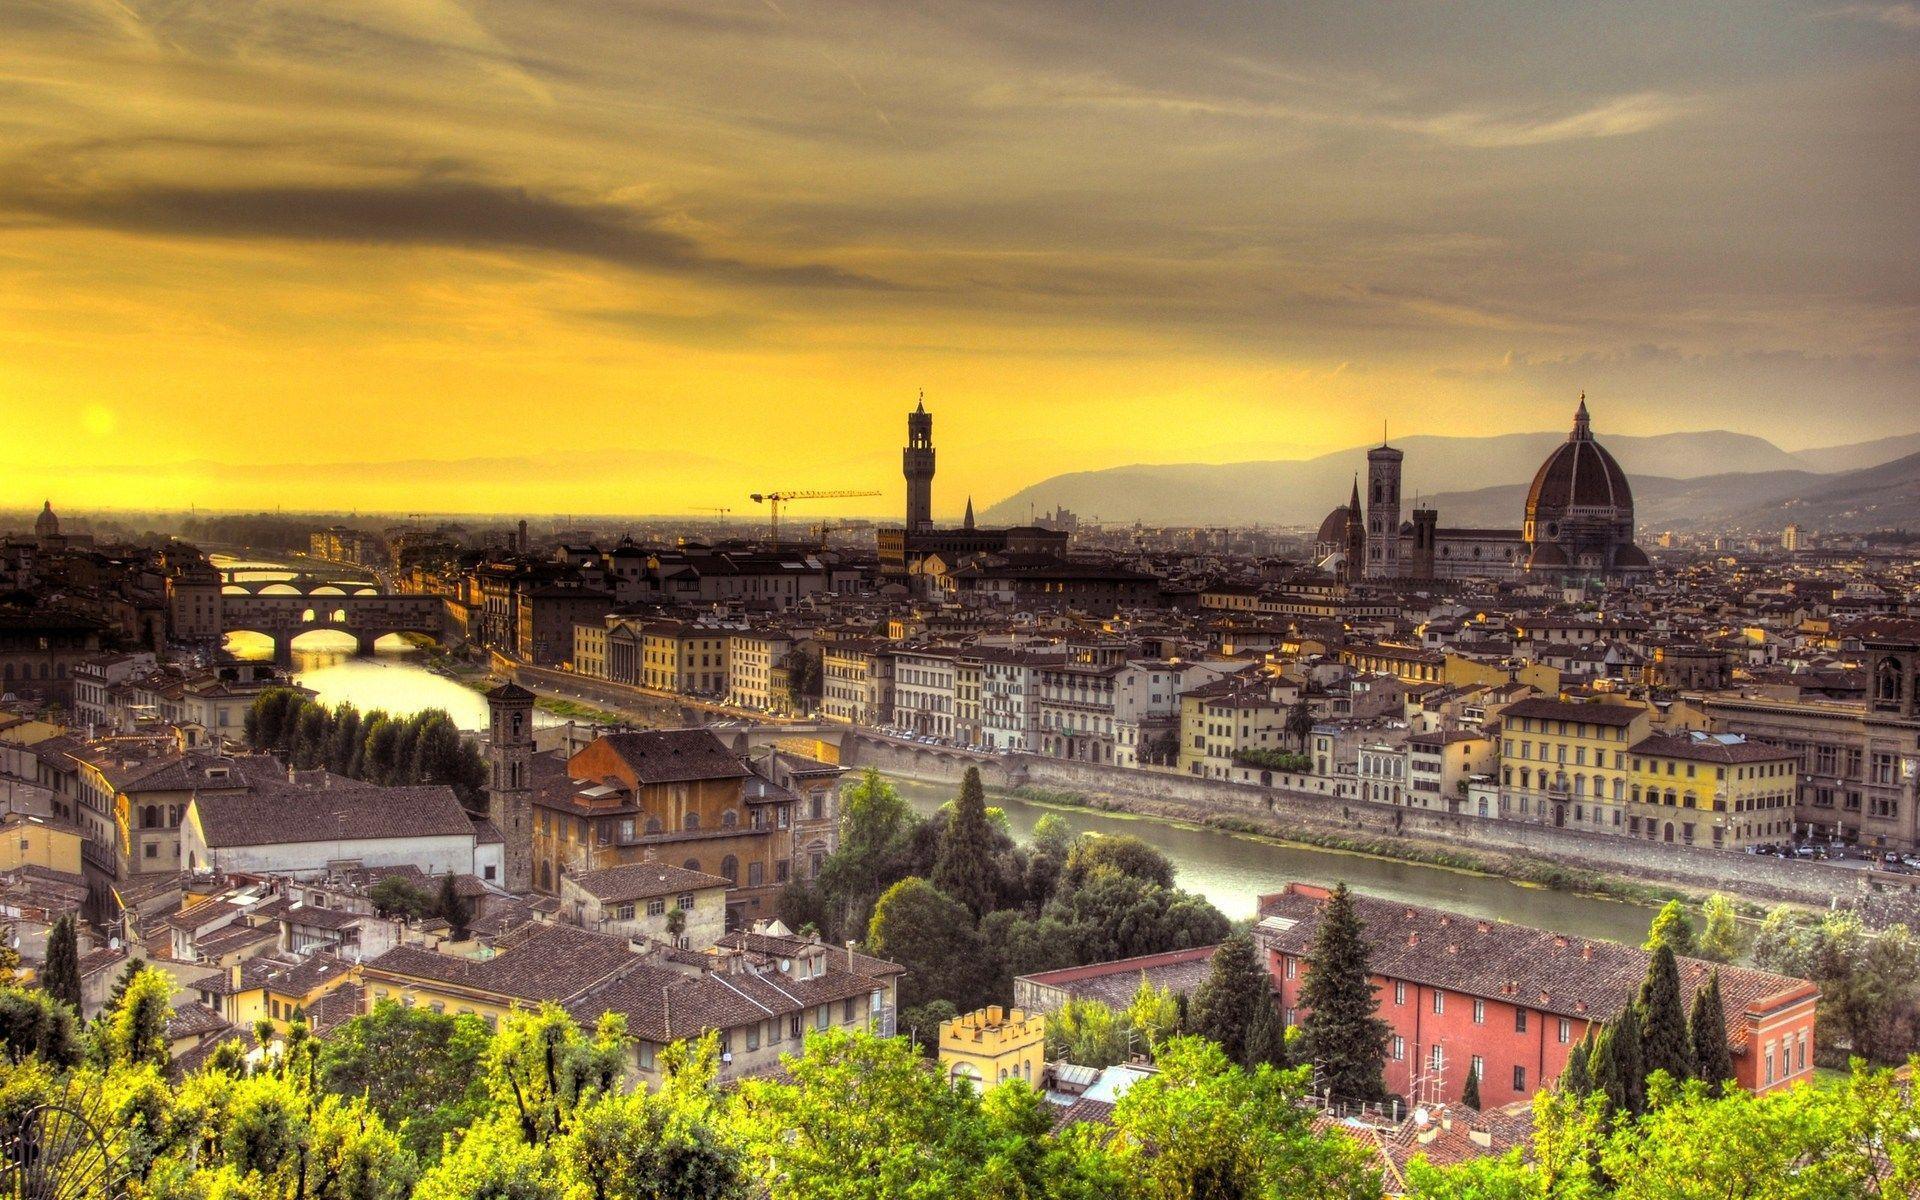 Florence Italy  Night city View wallpaper Florence italy